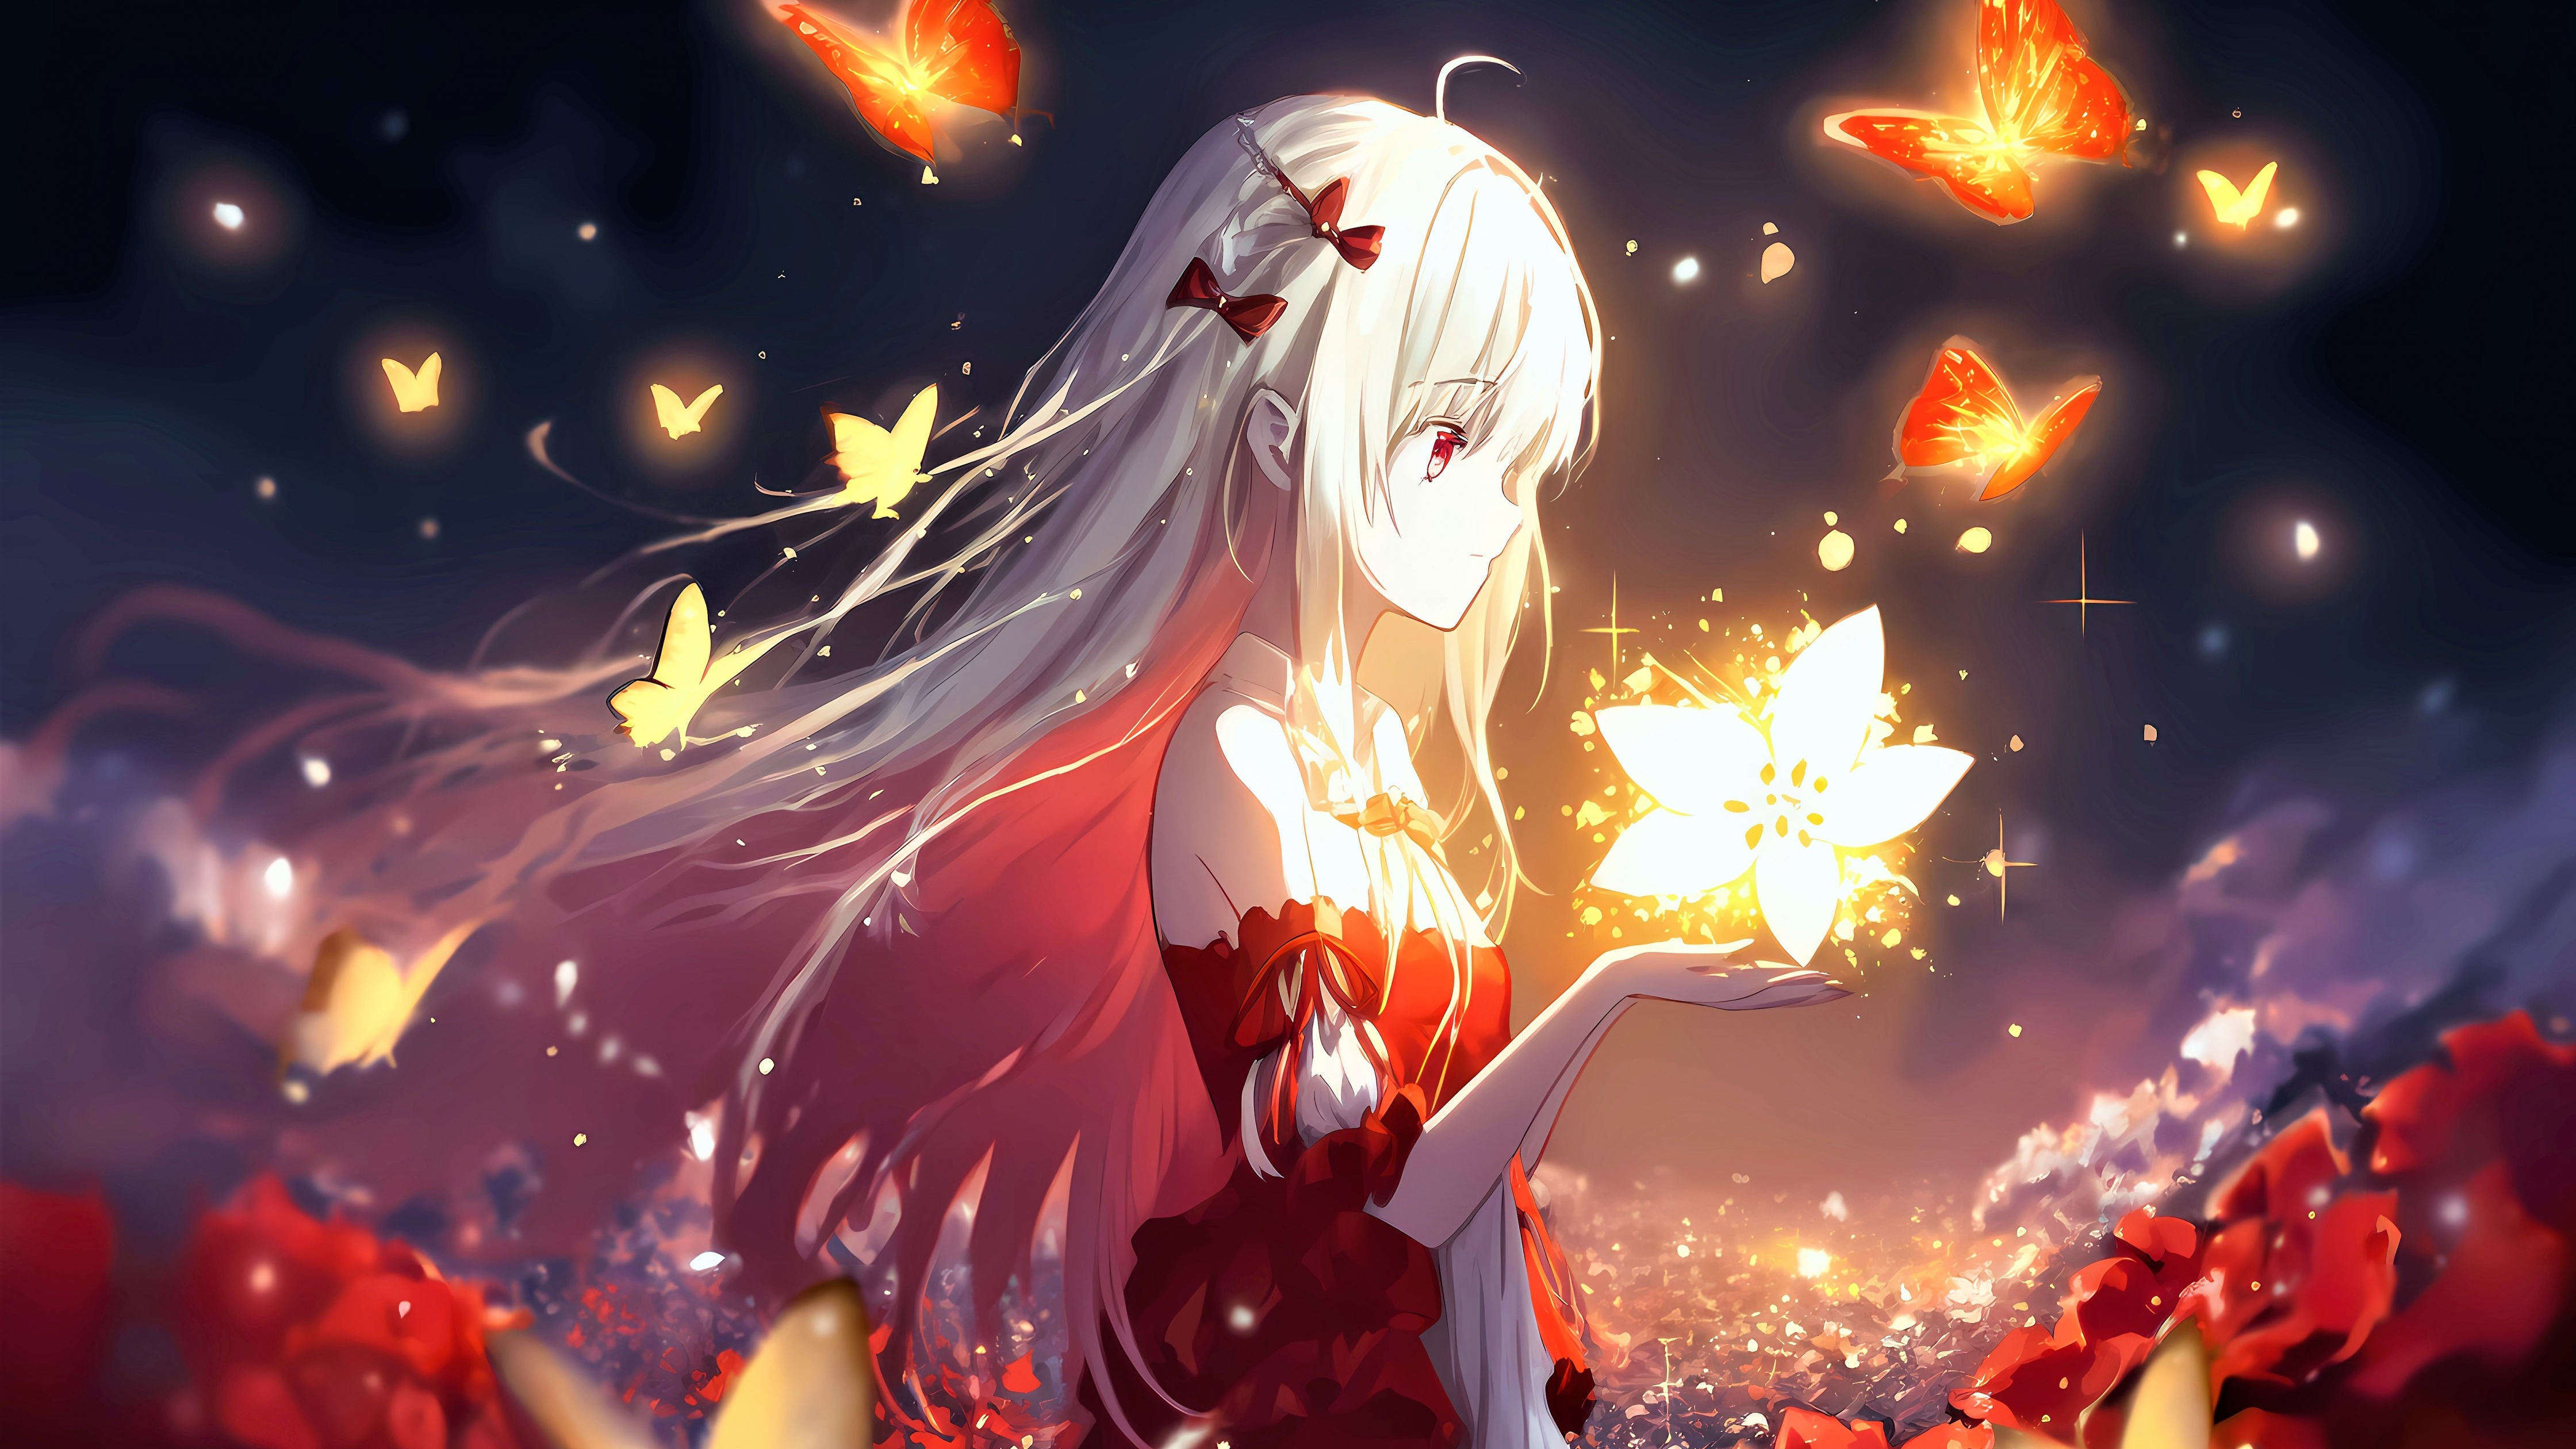 15 Red Anime Wallpapers for iPhone and Android by William Russell